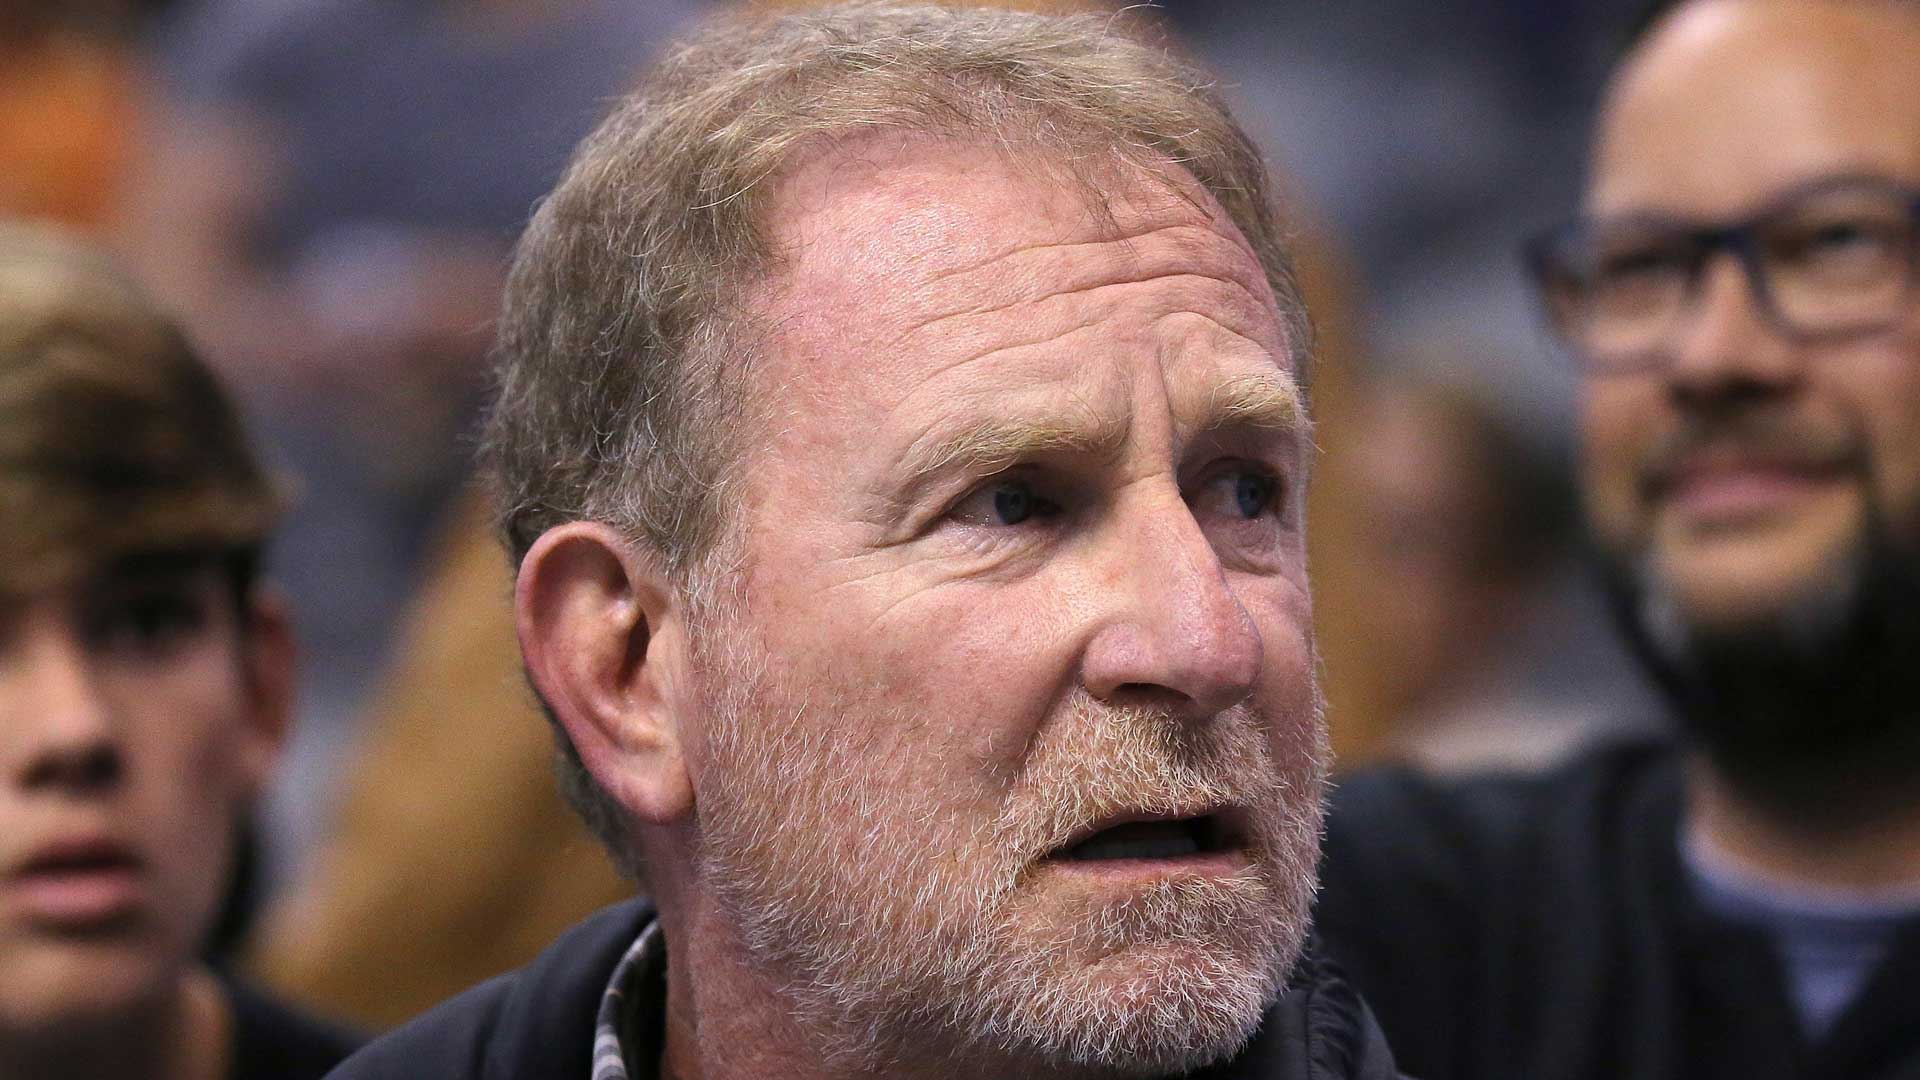 Phoenix Suns owner Robert Sarver watches the team play against the Memphis Grizzlies during the second half of an NBA basketball game in Phoenix, Dec. 11, 2019. The NBA has suspended Phoenix Suns and Phoenix Mercury owner Robert Sarver for one year, plus fined him $10 million, after an investigation found that he had engaged in what the league called “workplace misconduct and organizational deficiencies." The findings of the league's report, published Tuesday, Sept. 13, 2022, came nearly a year after the NBA asked a law firm to investigate allegations that Sarver had a history of racist, misogynistic and hostile incidents over his nearly two-decade tenure overseeing the franchise.